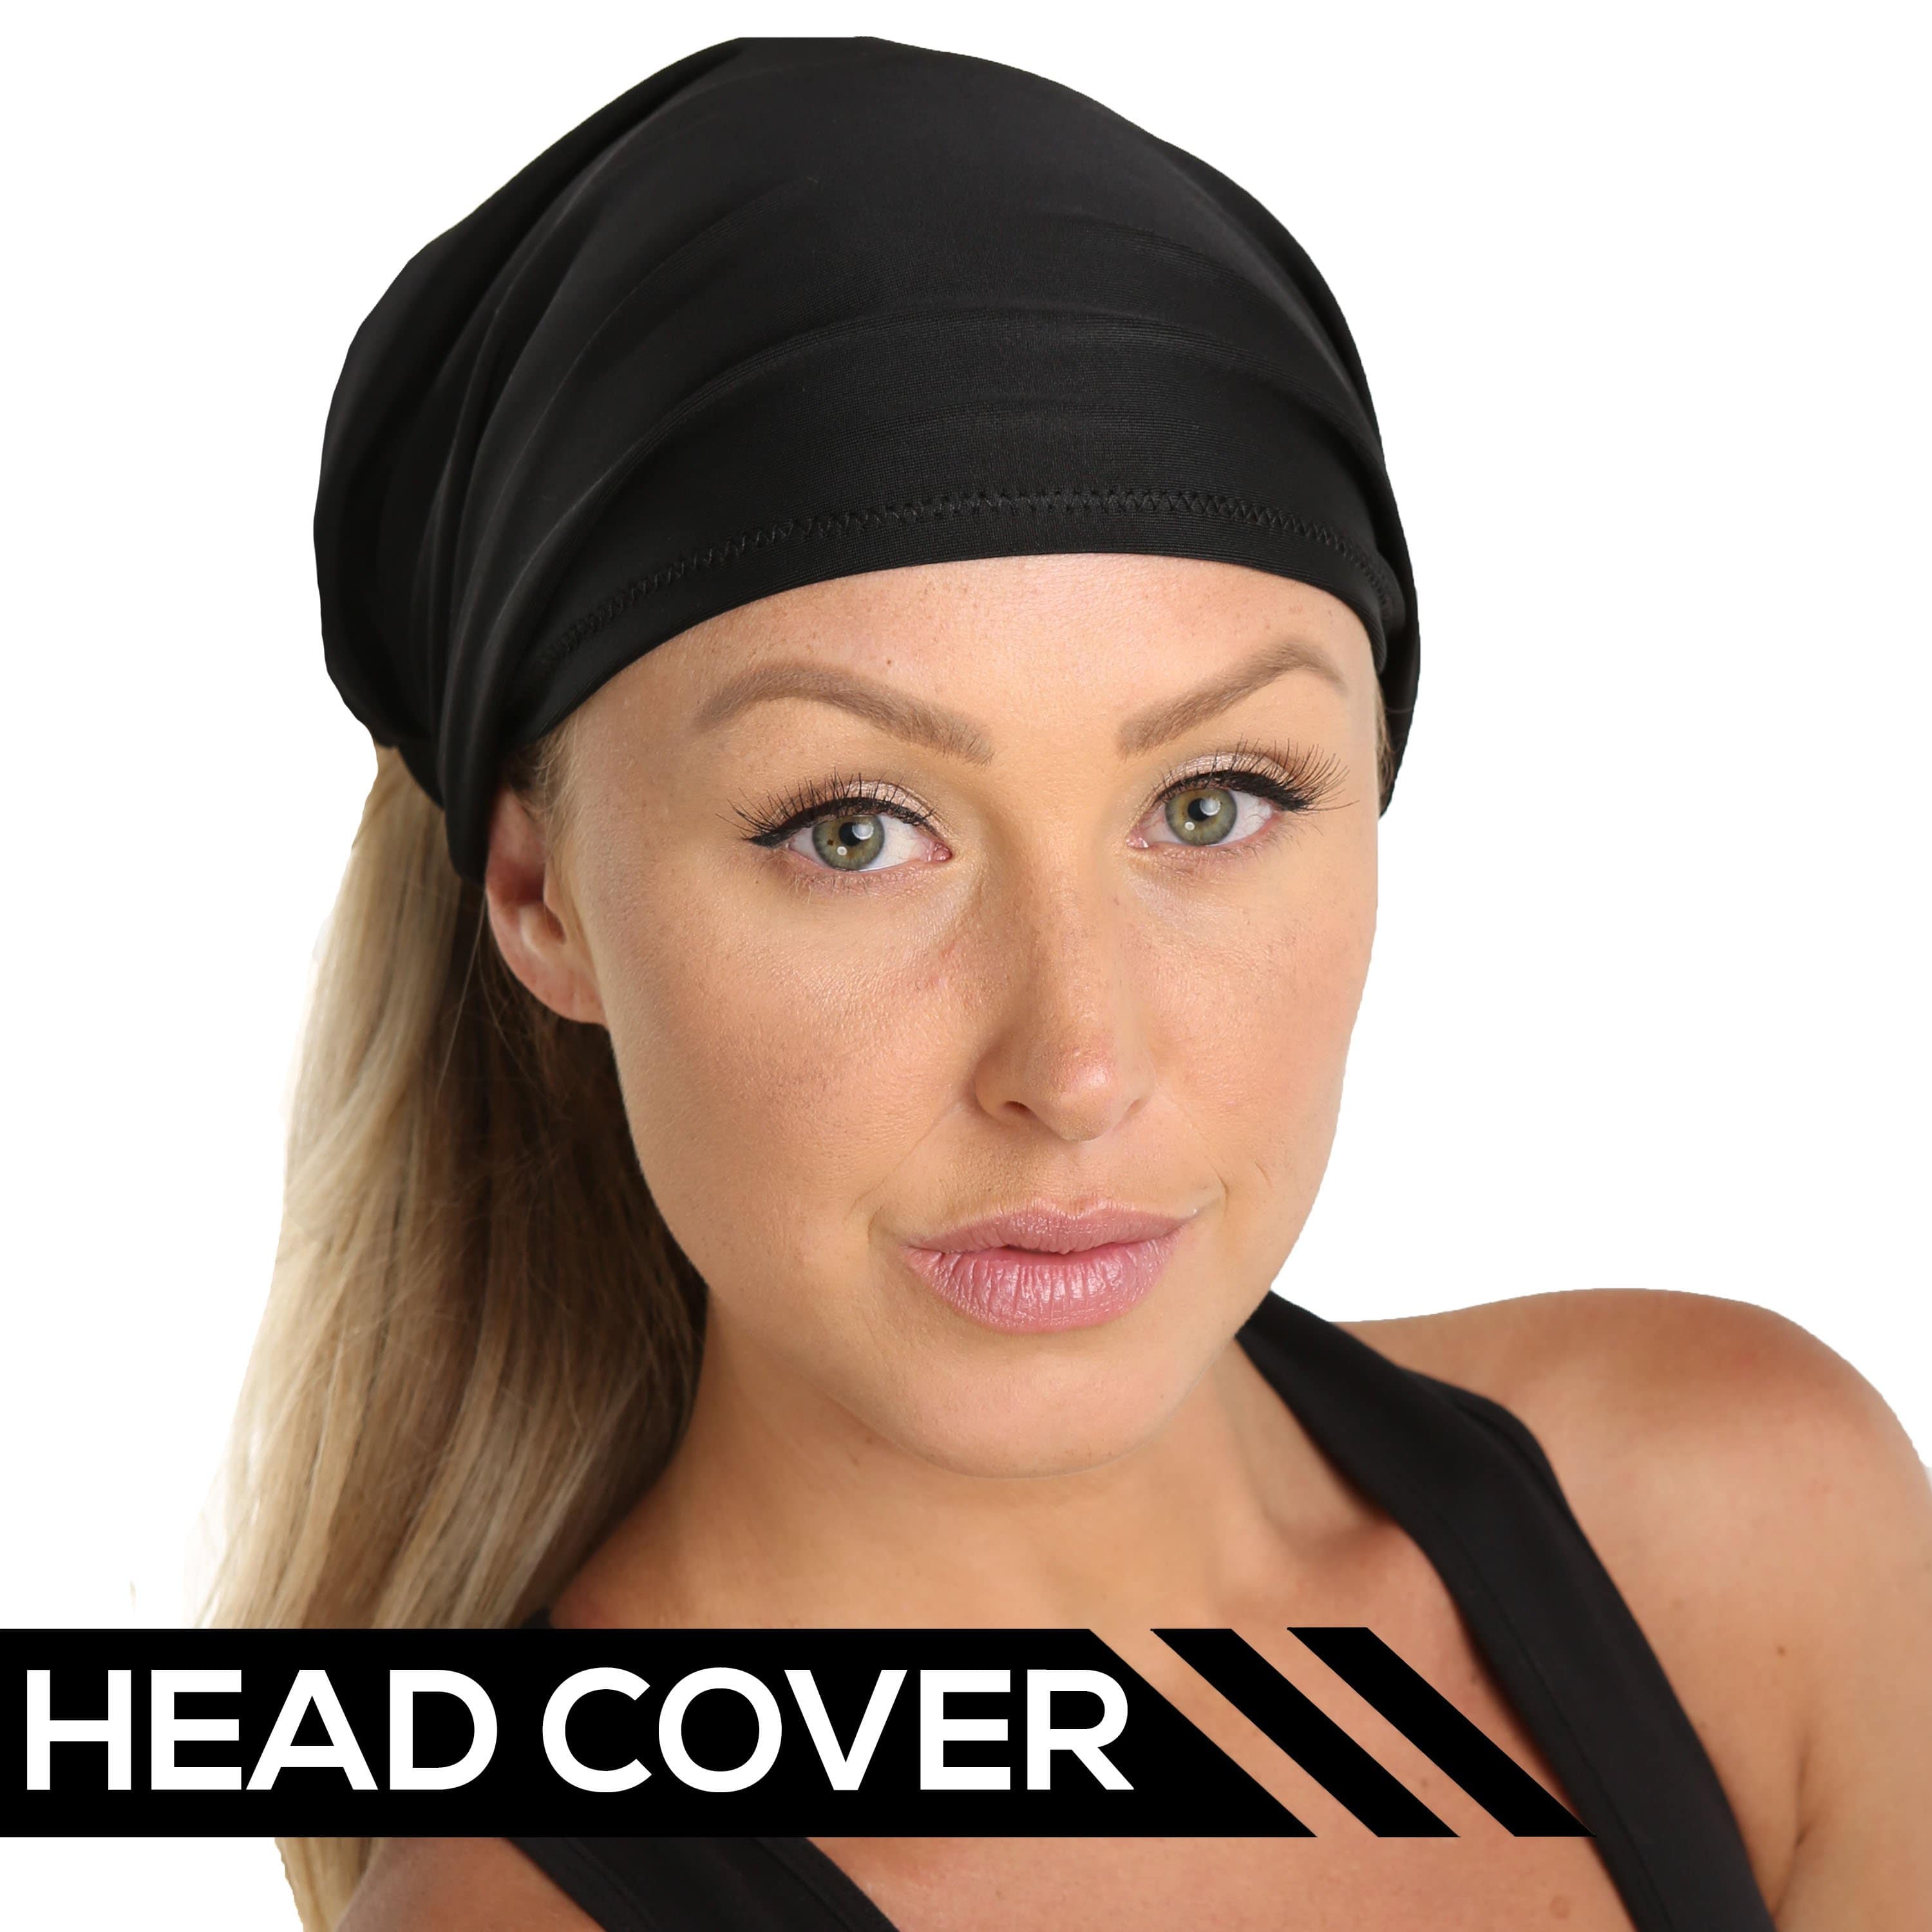 Womens yoga headband for hair and sweat in black.